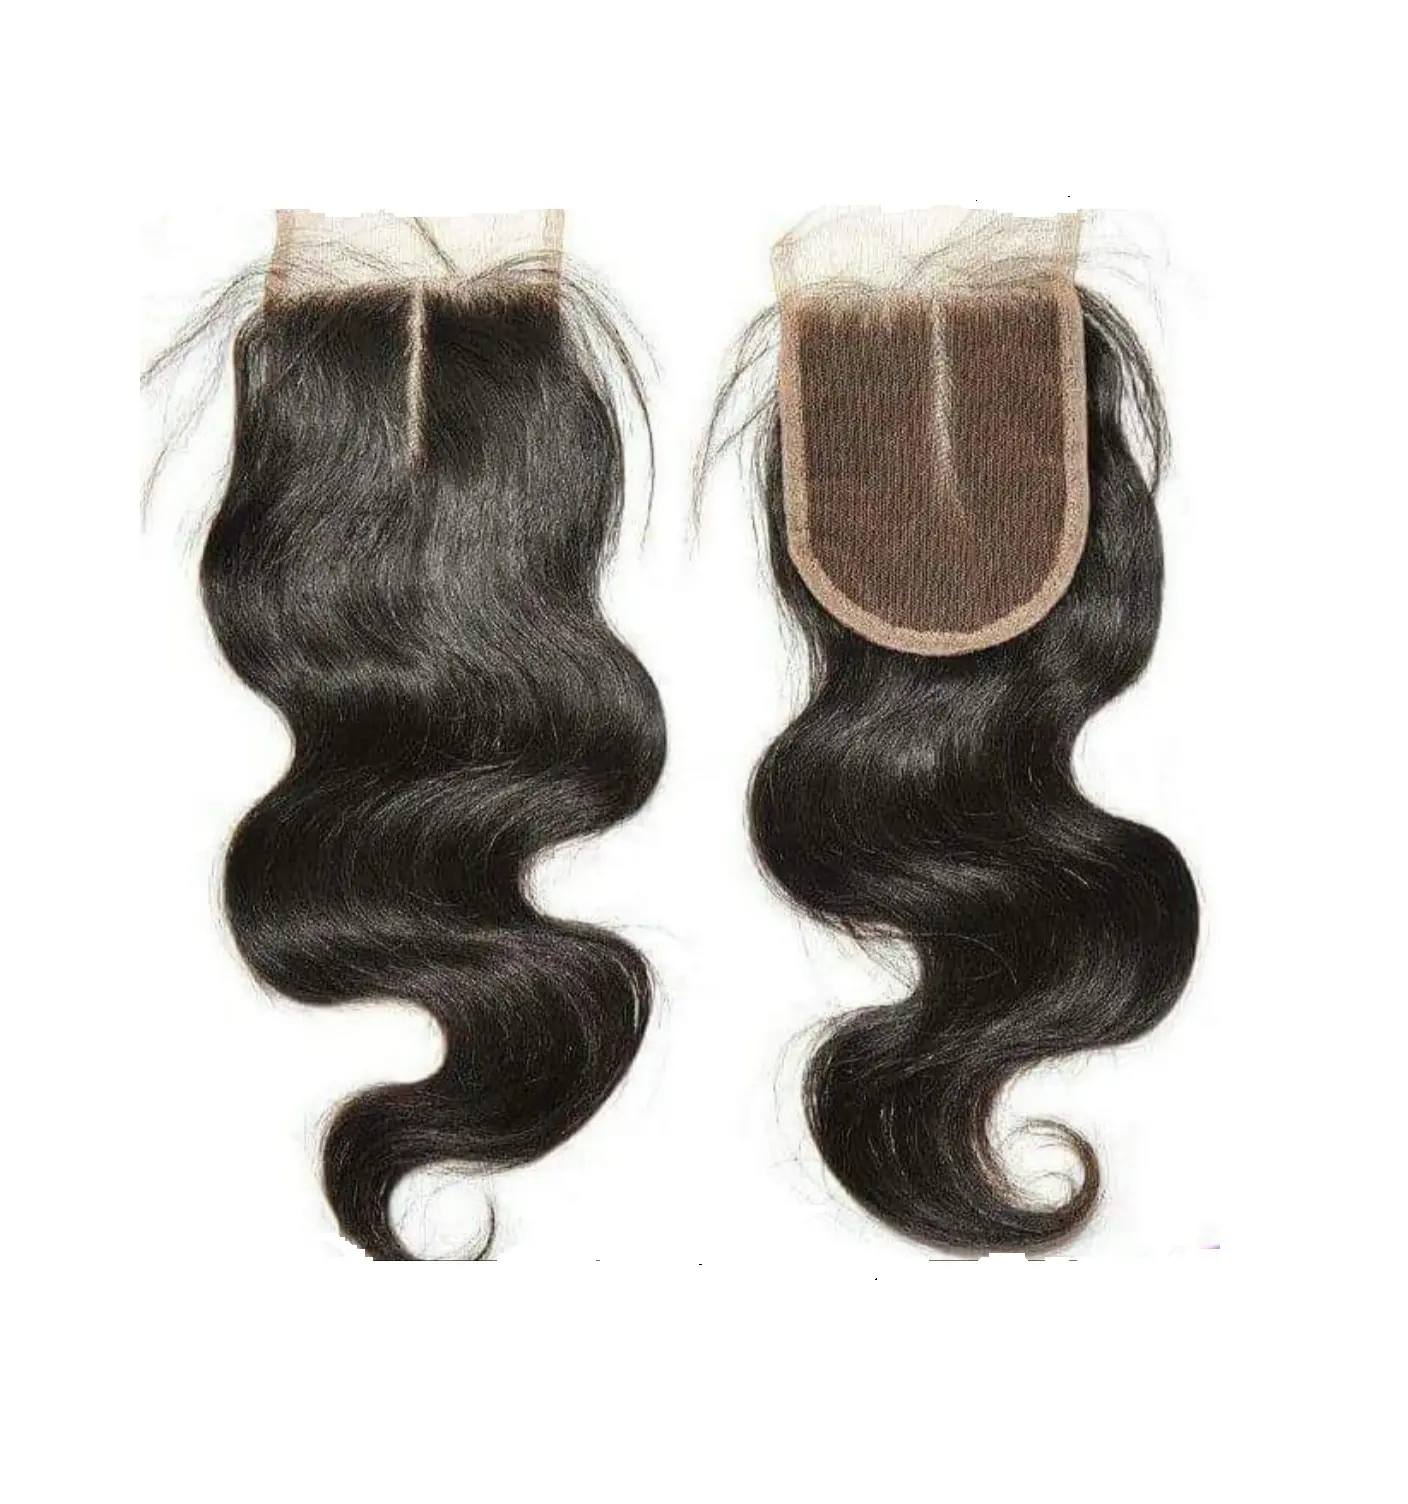 Hd Lace Indian Human Hair Closure And Frontal More Lace Products At Wholesale Factory Price